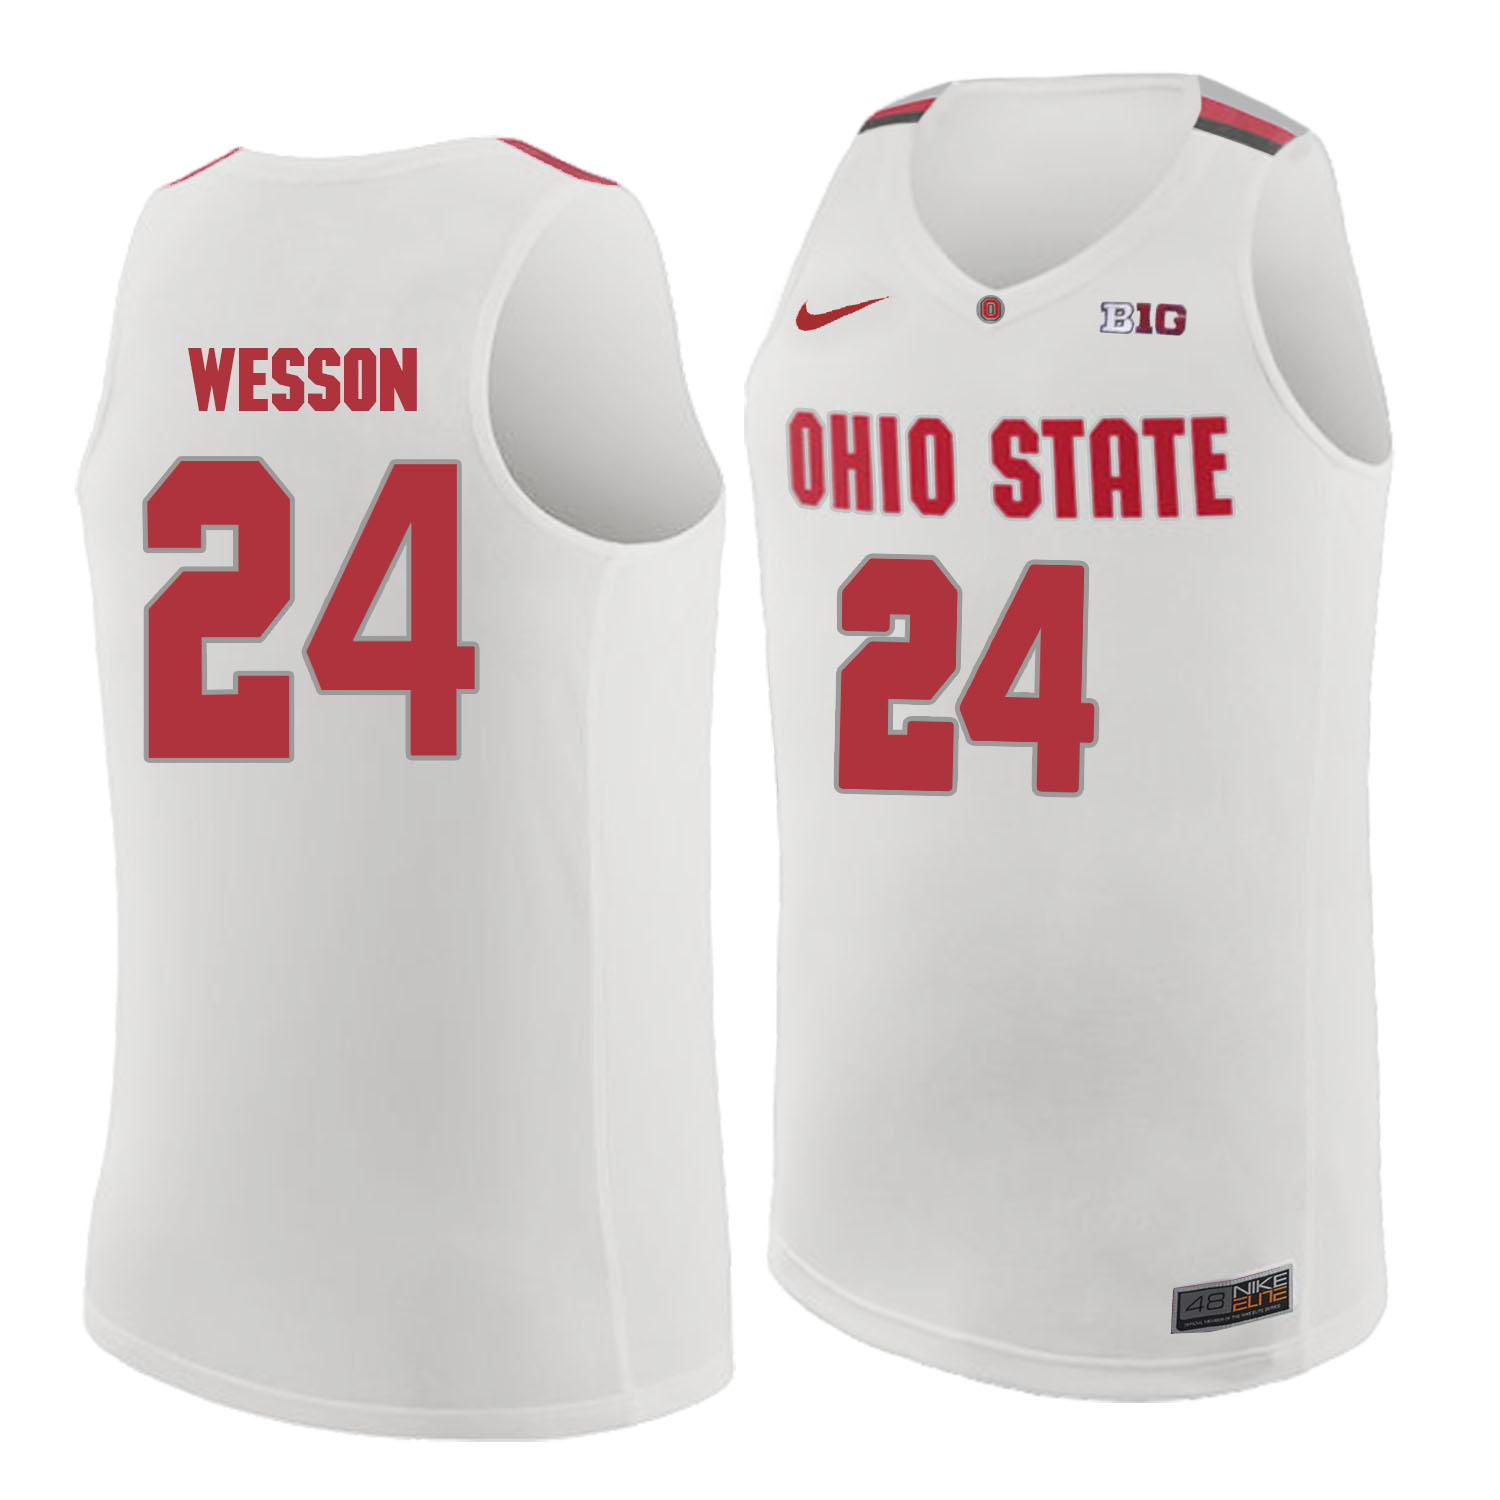 Ohio State Buckeyes 24 Andre Wesson White College Basketball Jersey